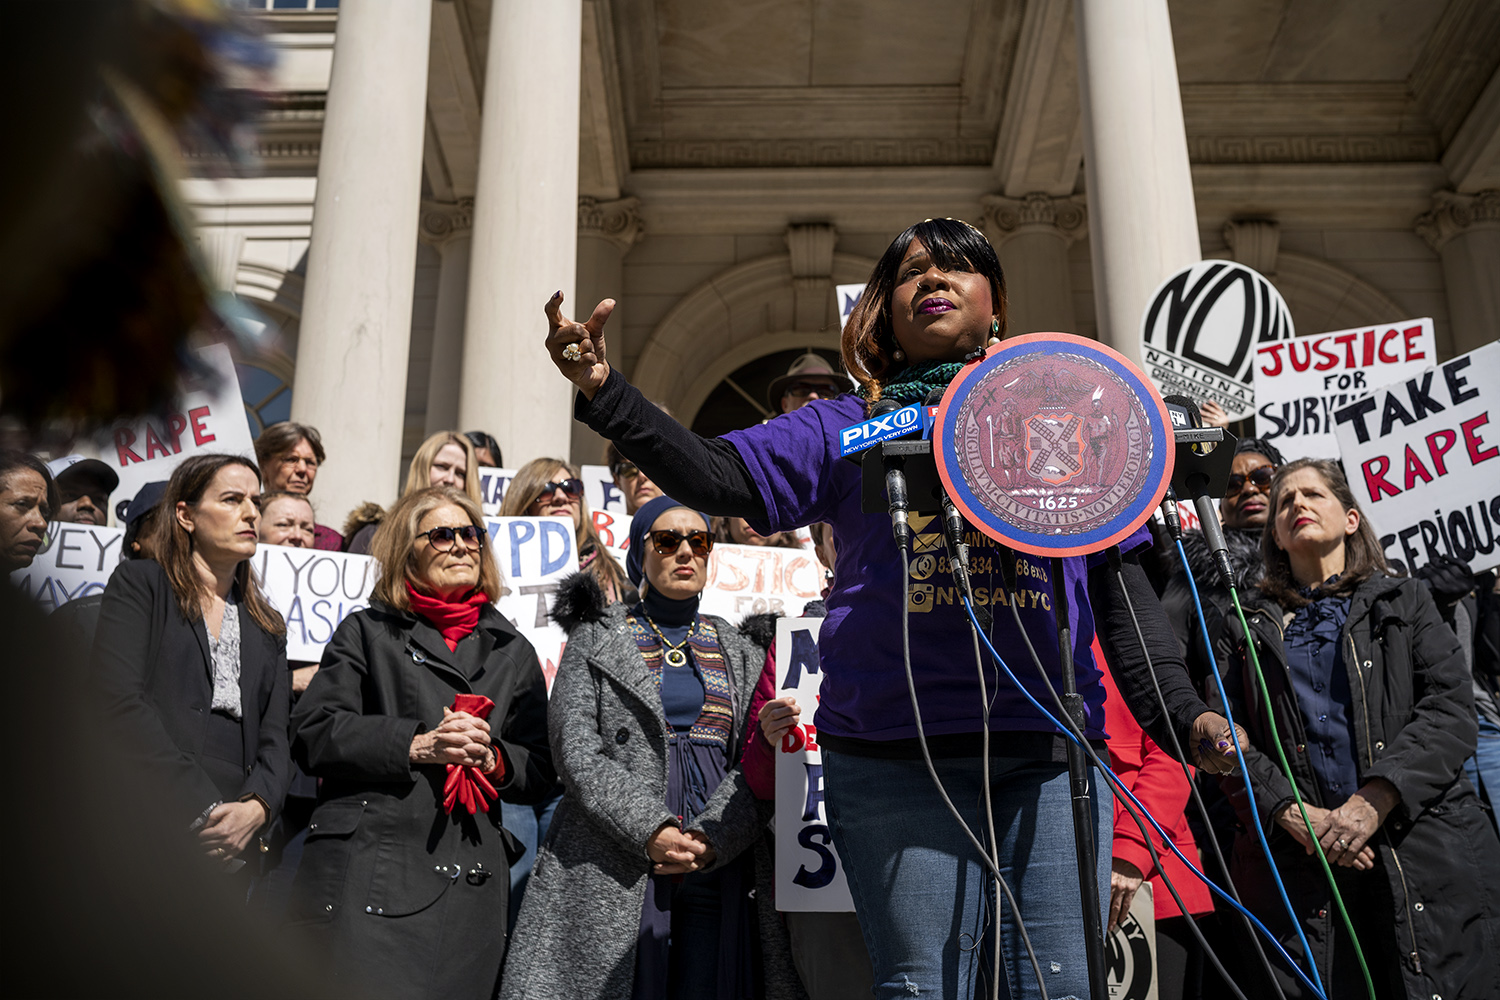 Aniya A., founder of the Neighborhood Violence Survivors Alliance shared her own story of becoming homeless after an attempted home invasion of her home in the Bronx that was ignored by NYPD. Photo by Tsubasa Berg